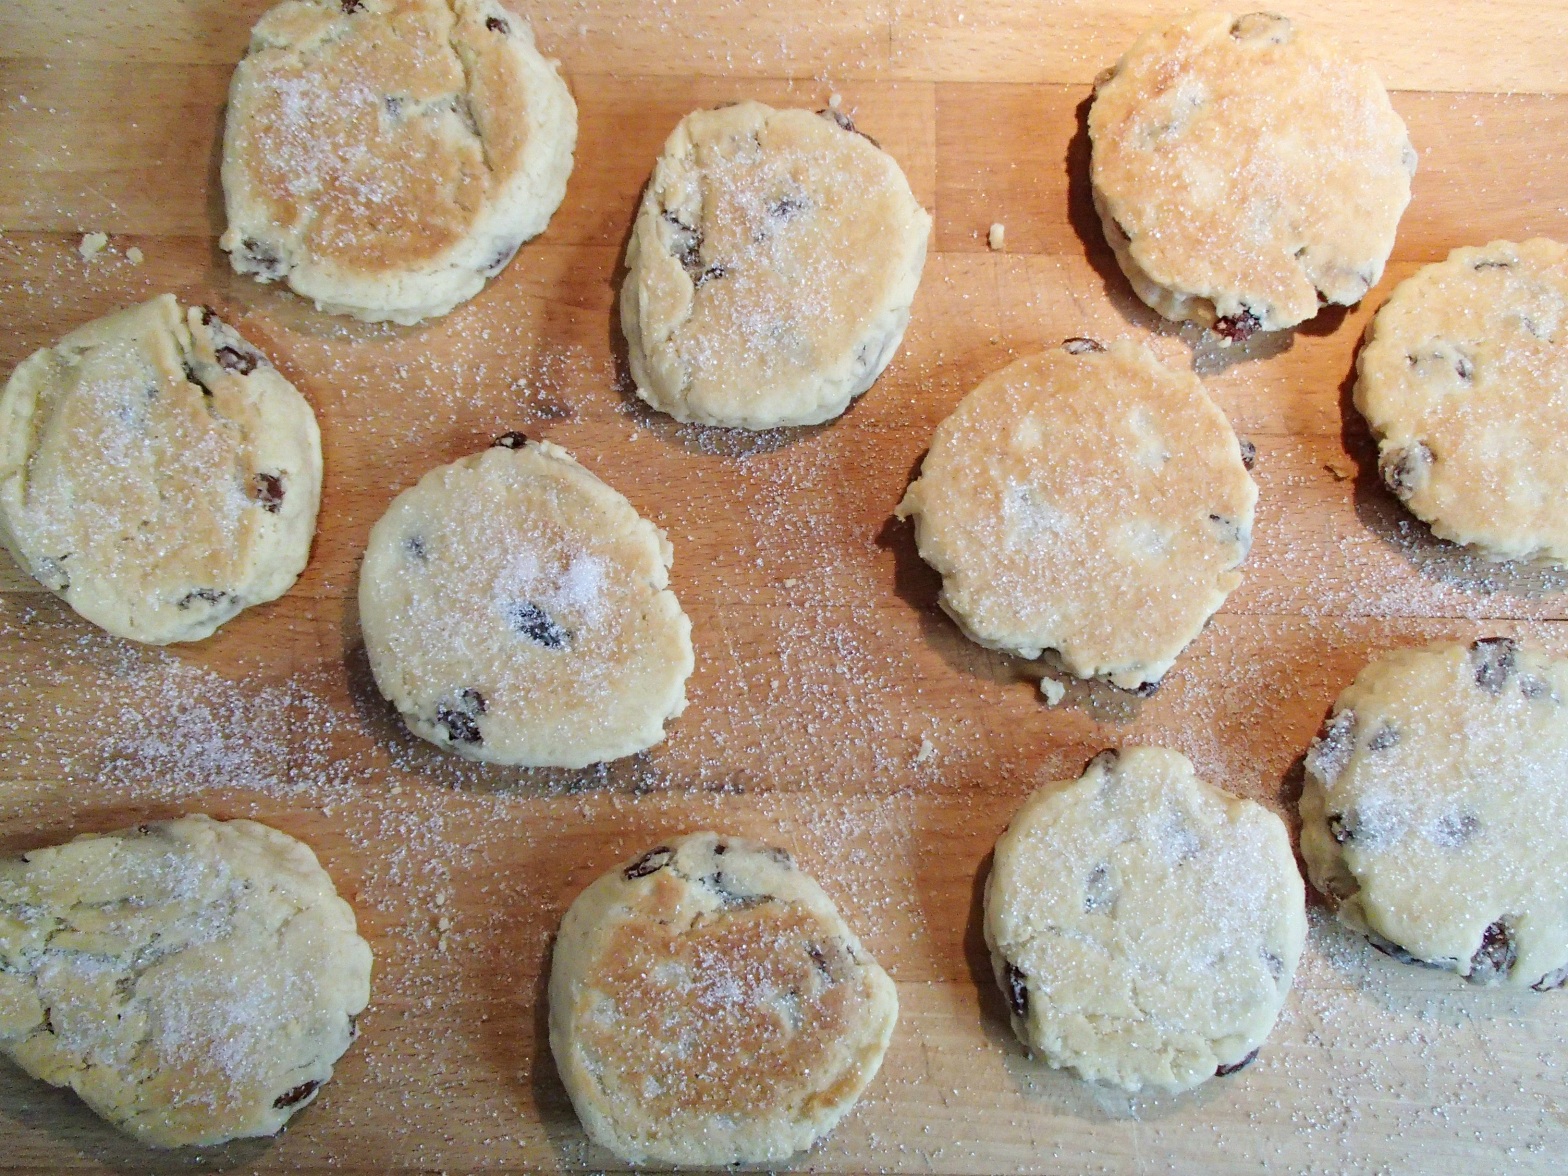 Welsh cakes